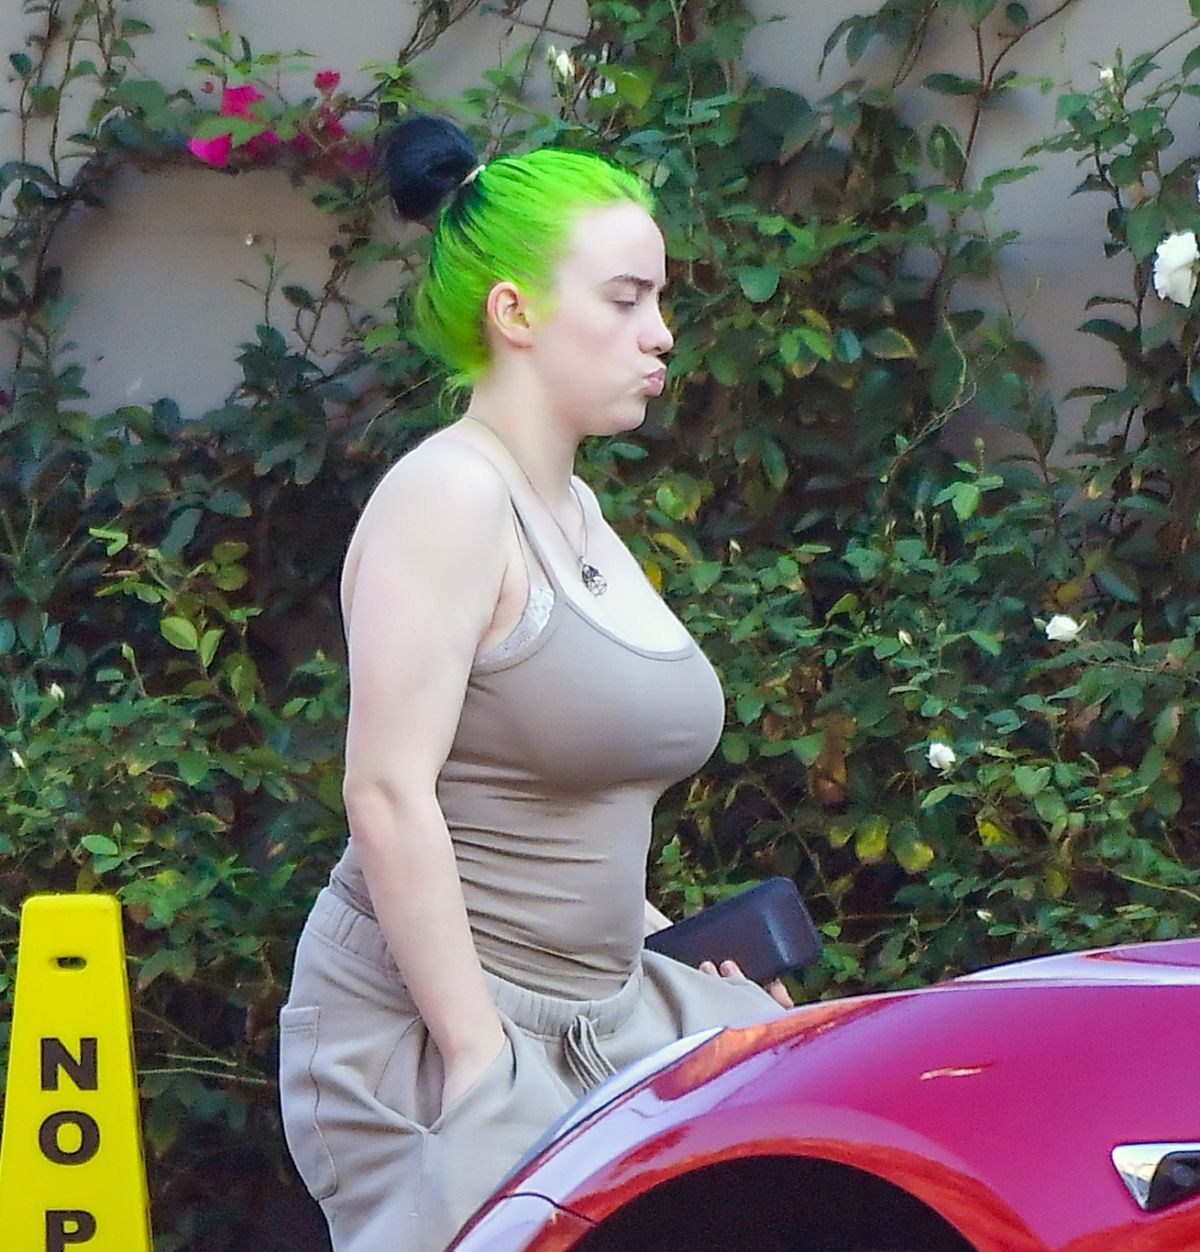 BILLIE EILISH with Bright Green Hair Out in Los Angeles 10/11/2020.